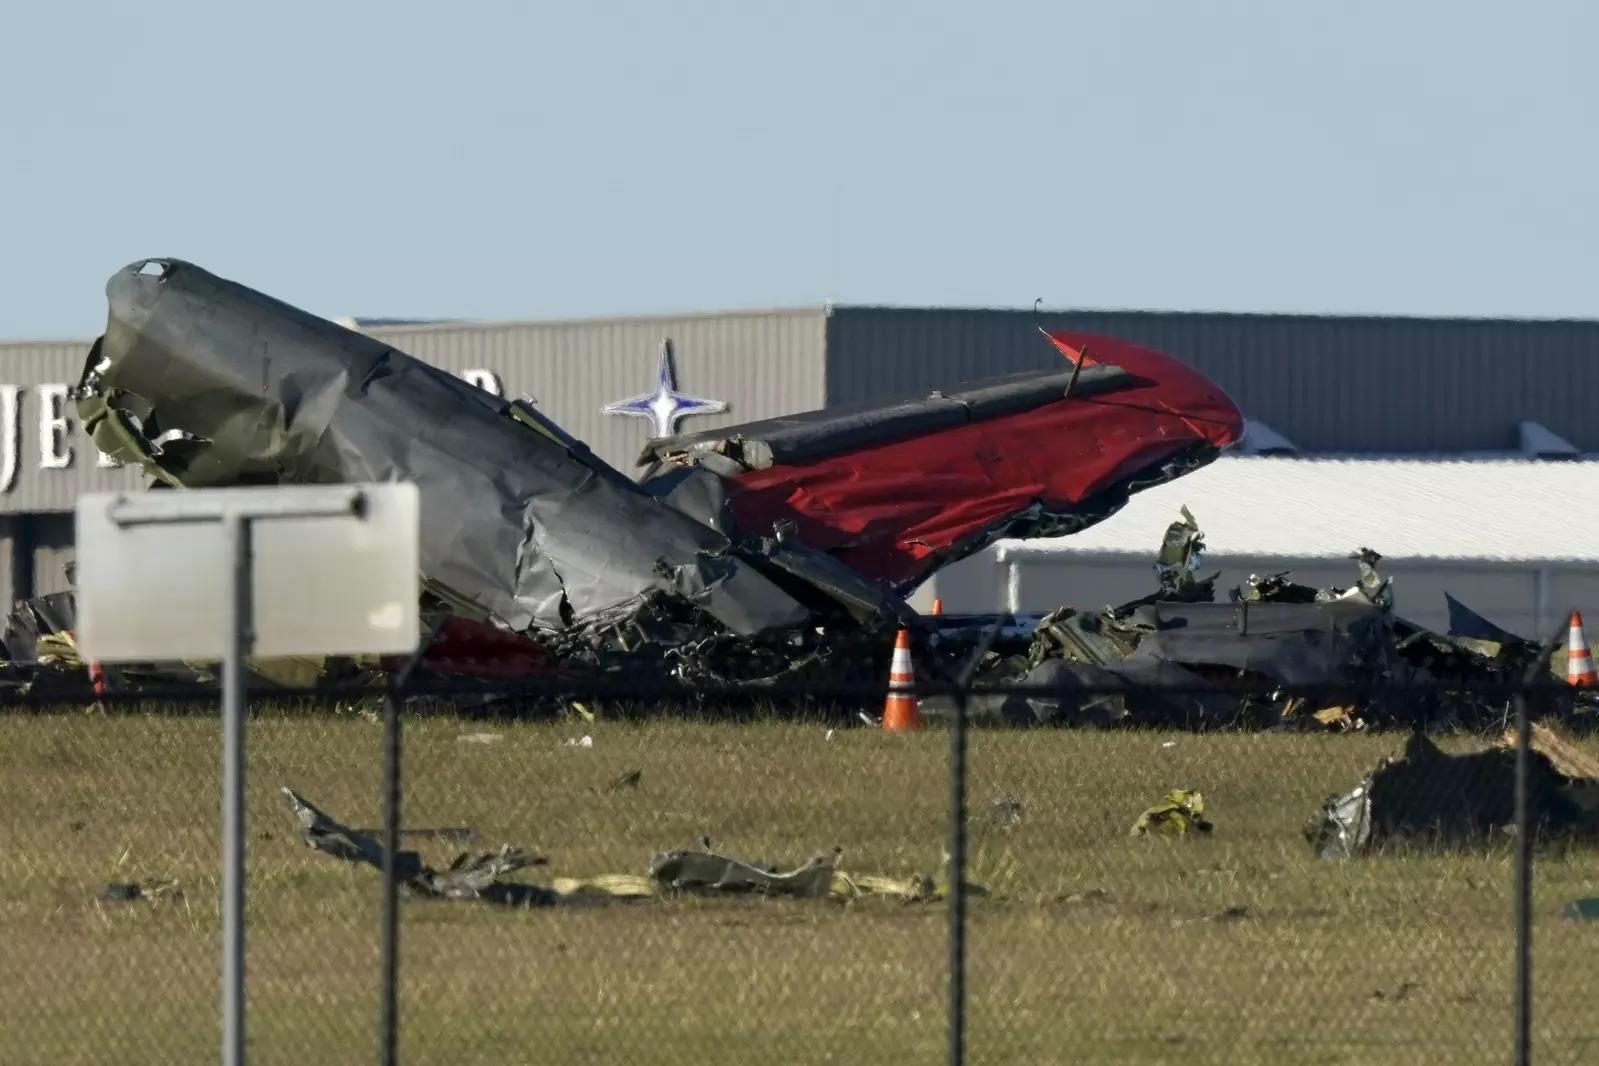 Six feared dead as two World War IIera planes collide at Dallas air